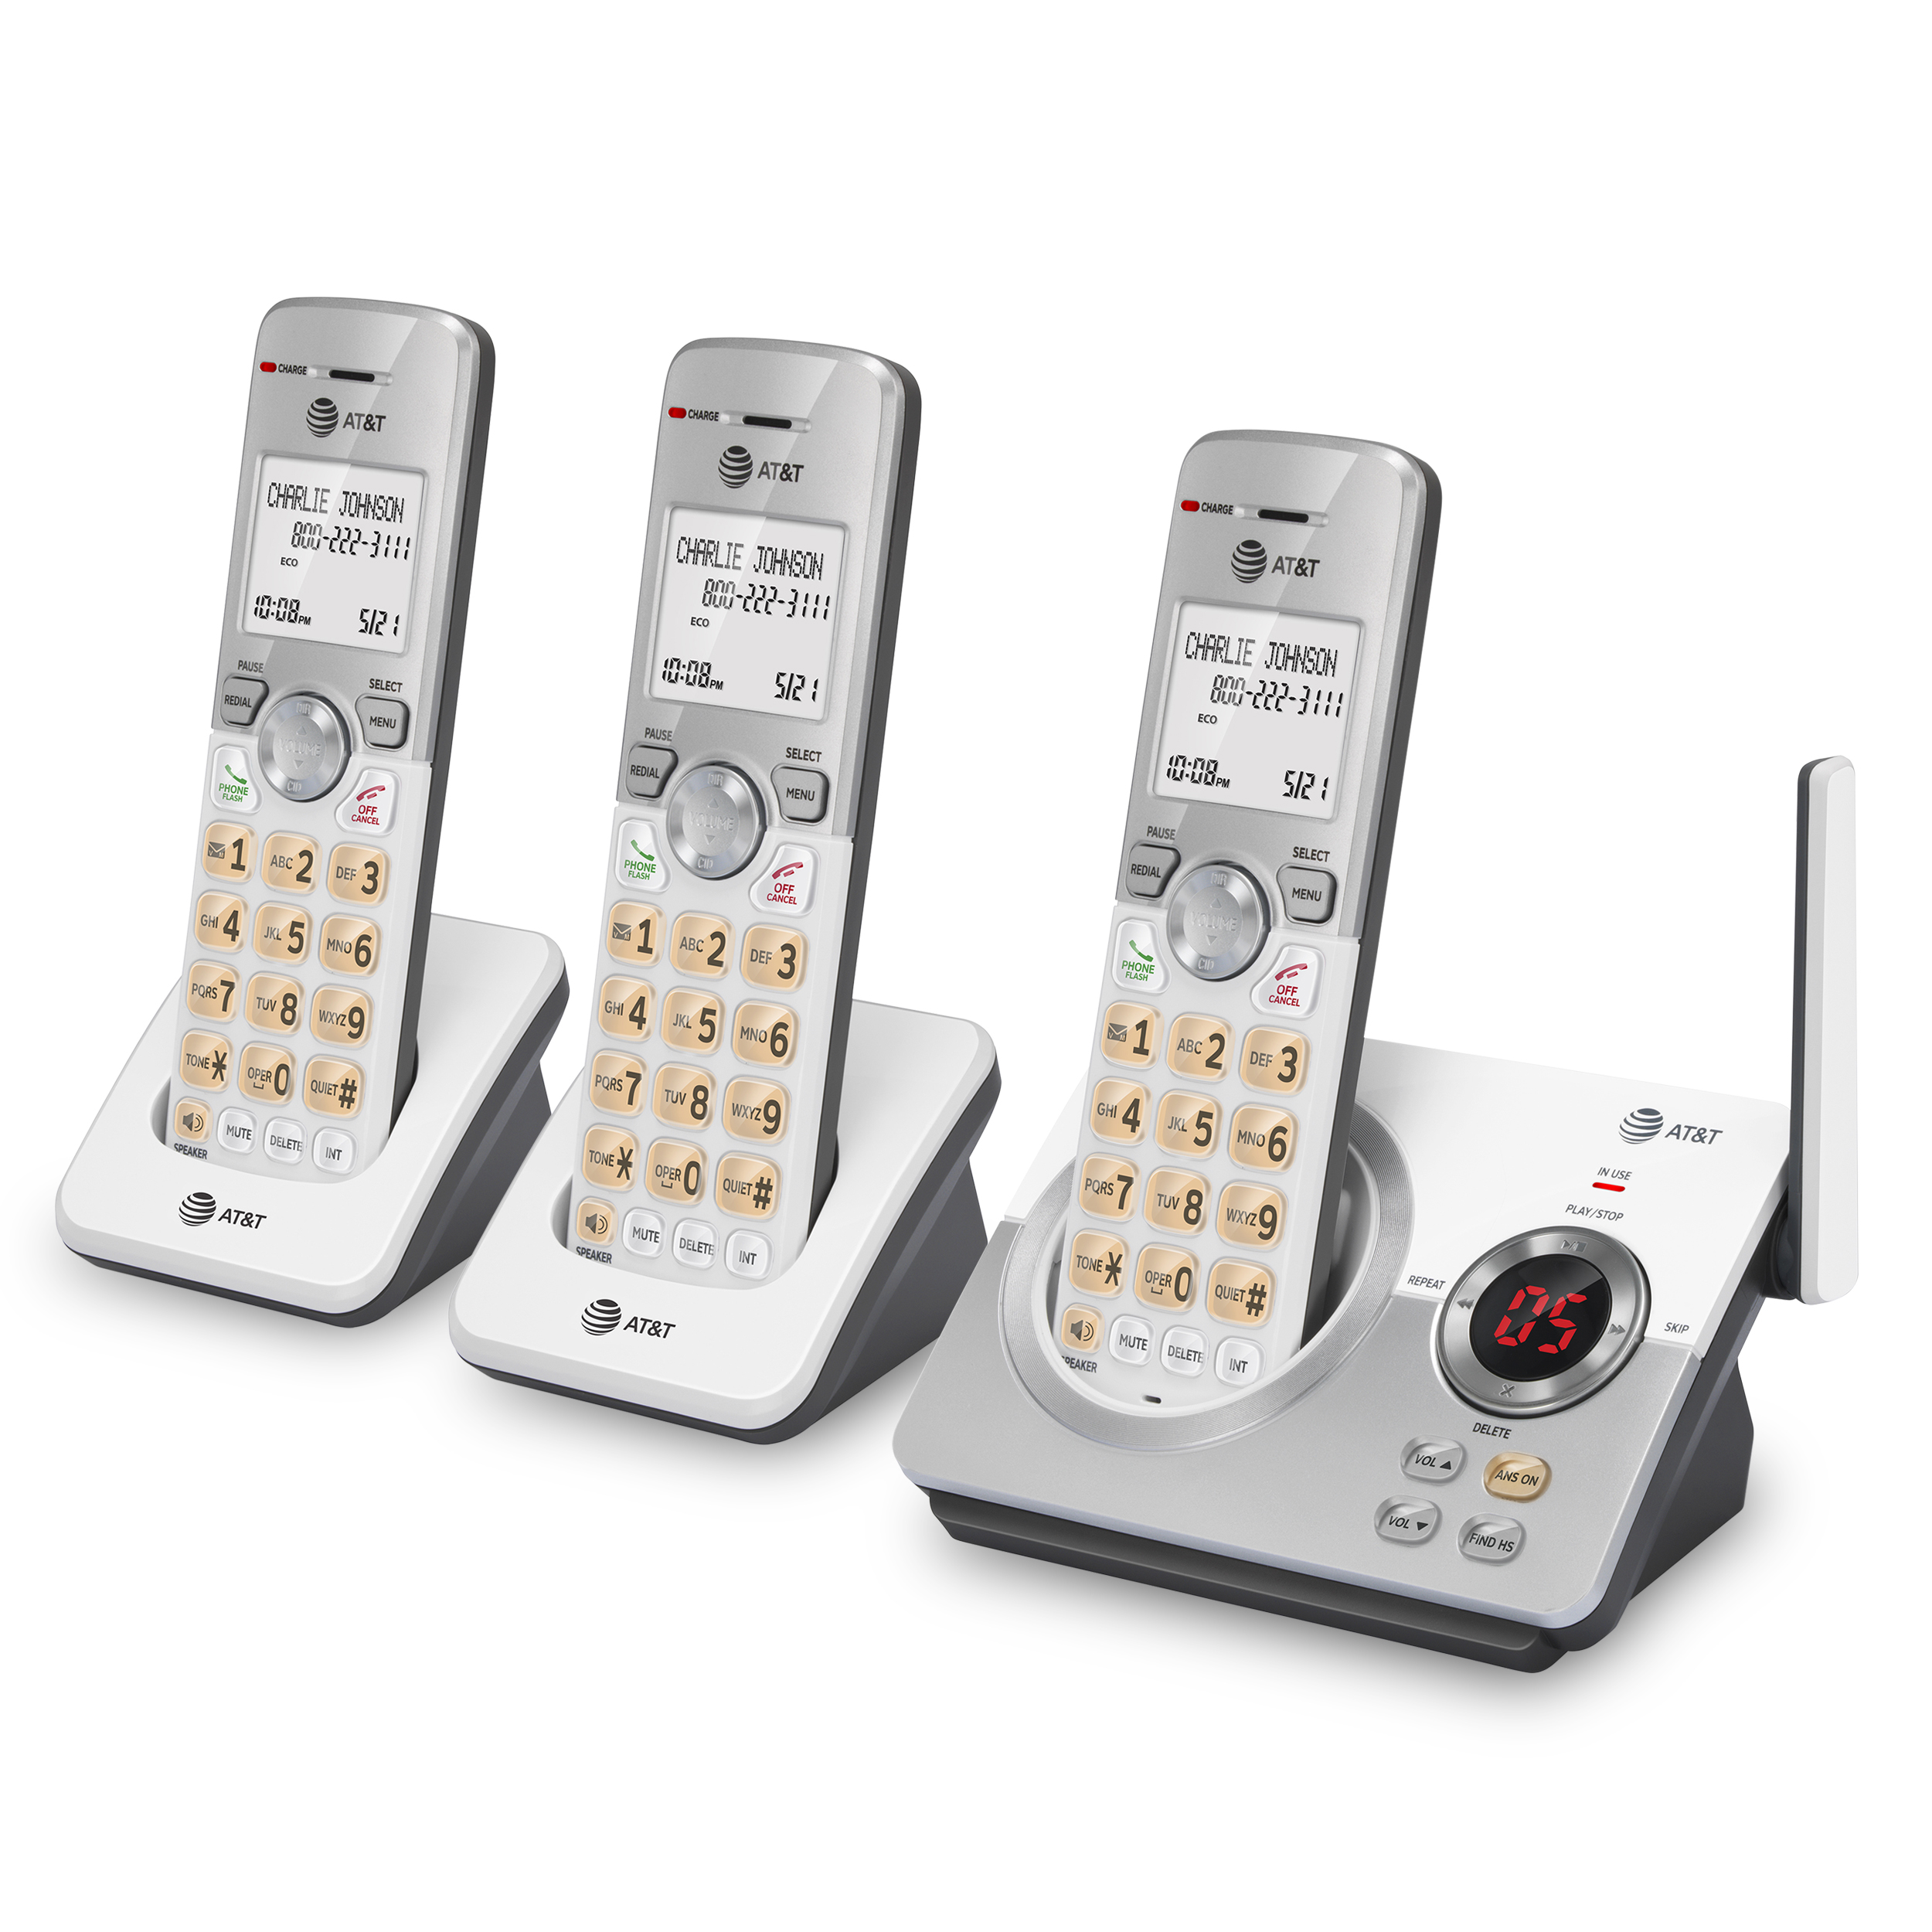 AT&T EL52319 Expandable Cordless Phone with Unsurpassed Range, Answering System and Caller ID, 3 Handsets, White/Silver - image 5 of 10